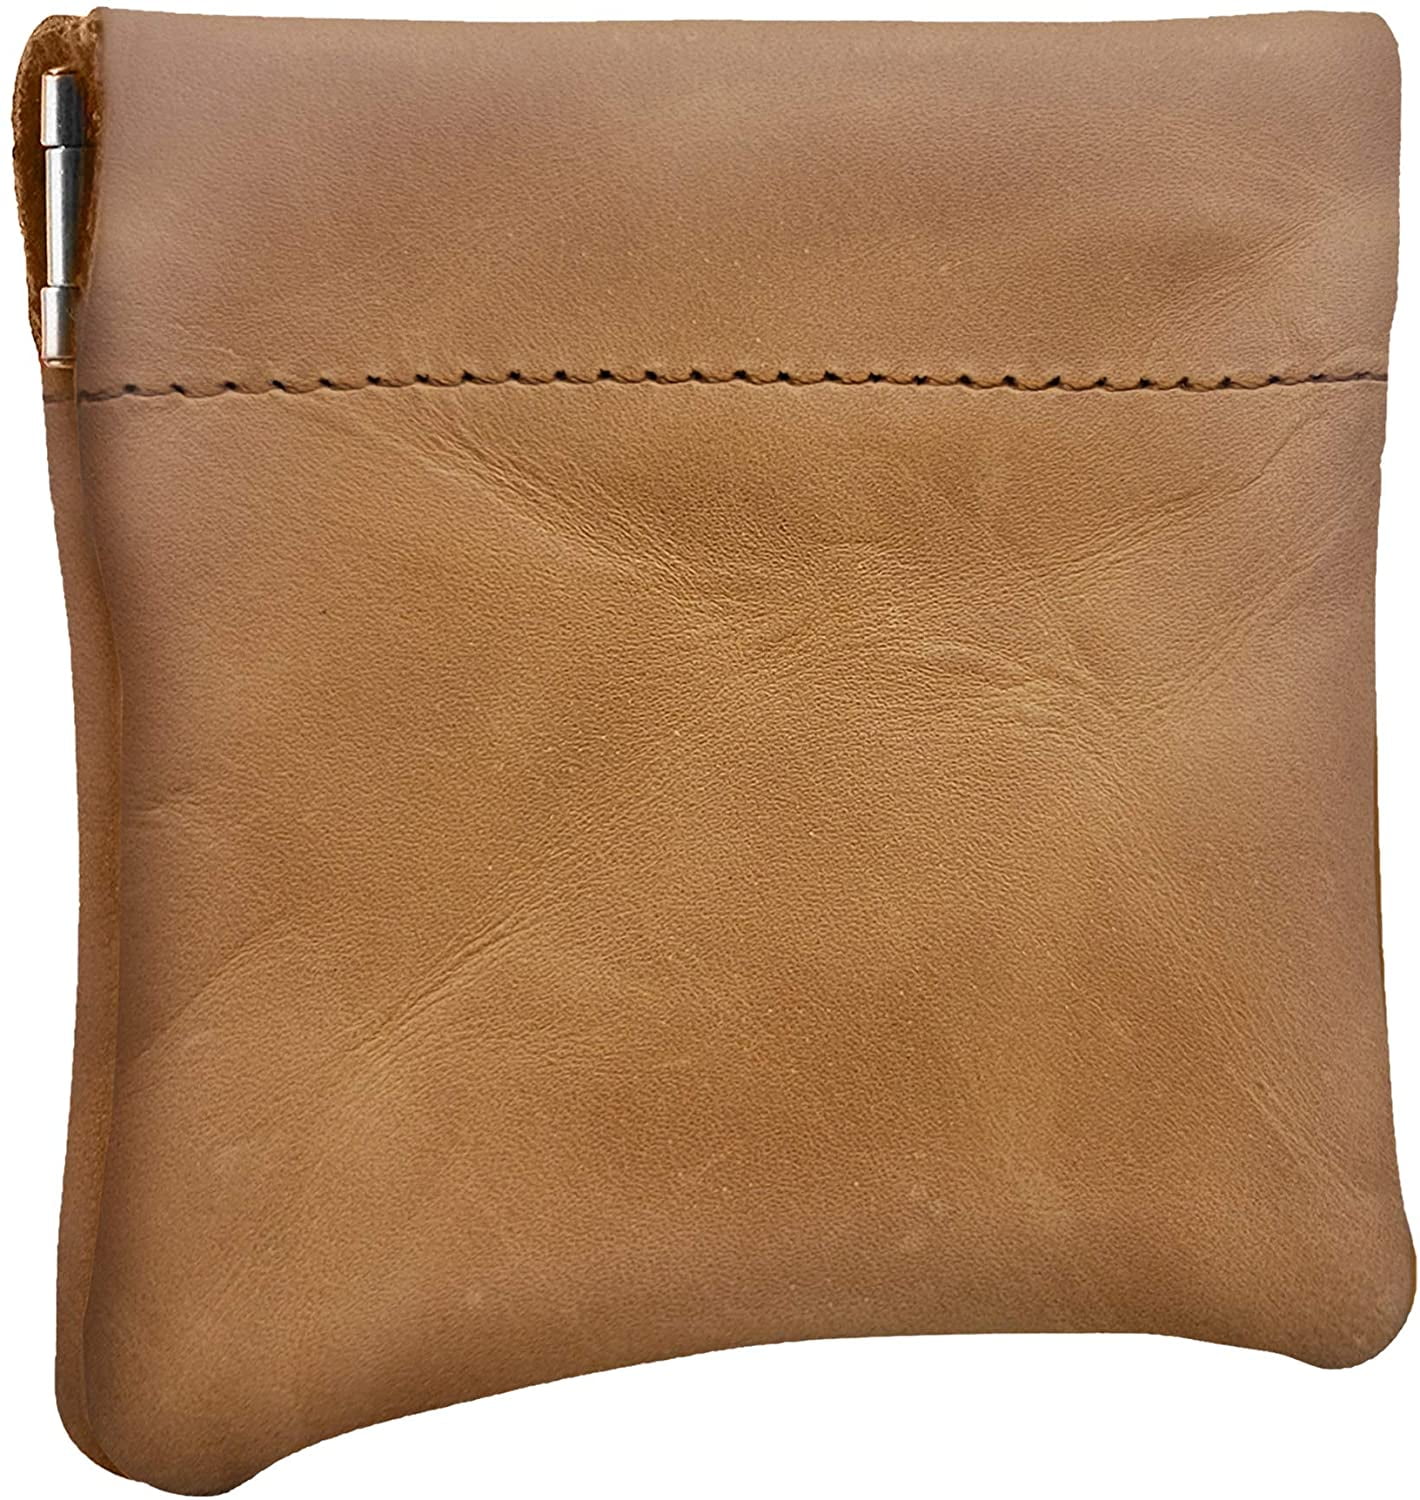 North Star Mens Leather Squeeze Coin Pouch Change Holder